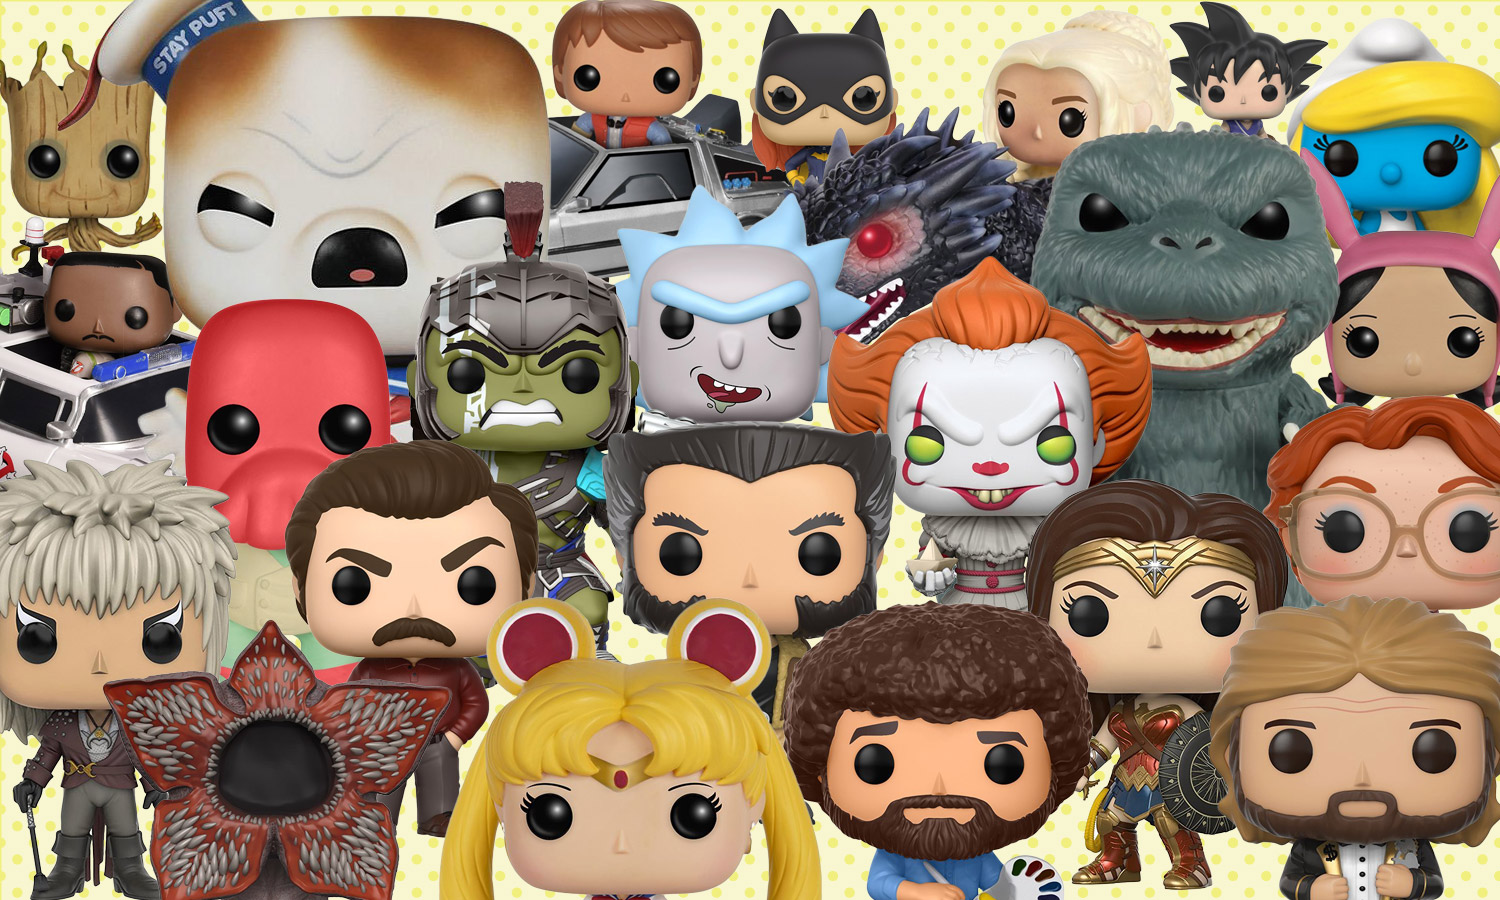 Best Funko Pop Vinyls - Figures to Add to Your Collection | Tom's Guide